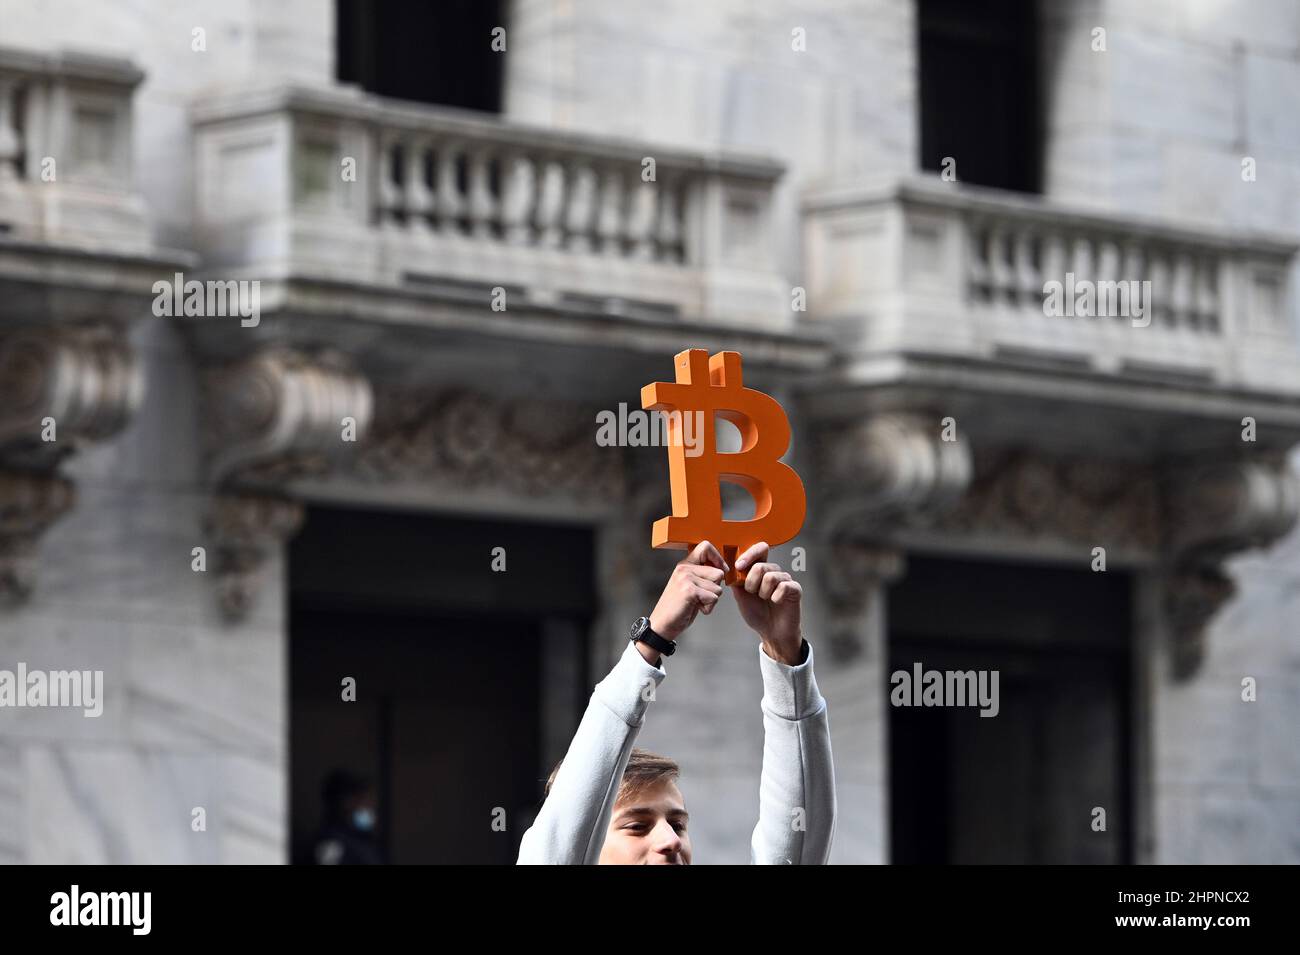 New York, USA. 22nd Feb, 2022. A man holds up a Bitcoin currency emblem (by artist Leonid Sukala) in front of the New York Stock Exchange as the DOW reacts to the news that Russian President Vladimir Putin ordered troops into Ukraine, New York, NY, February 22, 2022. Stocks tumbled as crude oil price surged while the United States and its allies announced economic sanctions against Russia for its incursion into Ukraine. (Photo by Anthony Behar/Sipa USA) Credit: Sipa USA/Alamy Live News Stock Photo